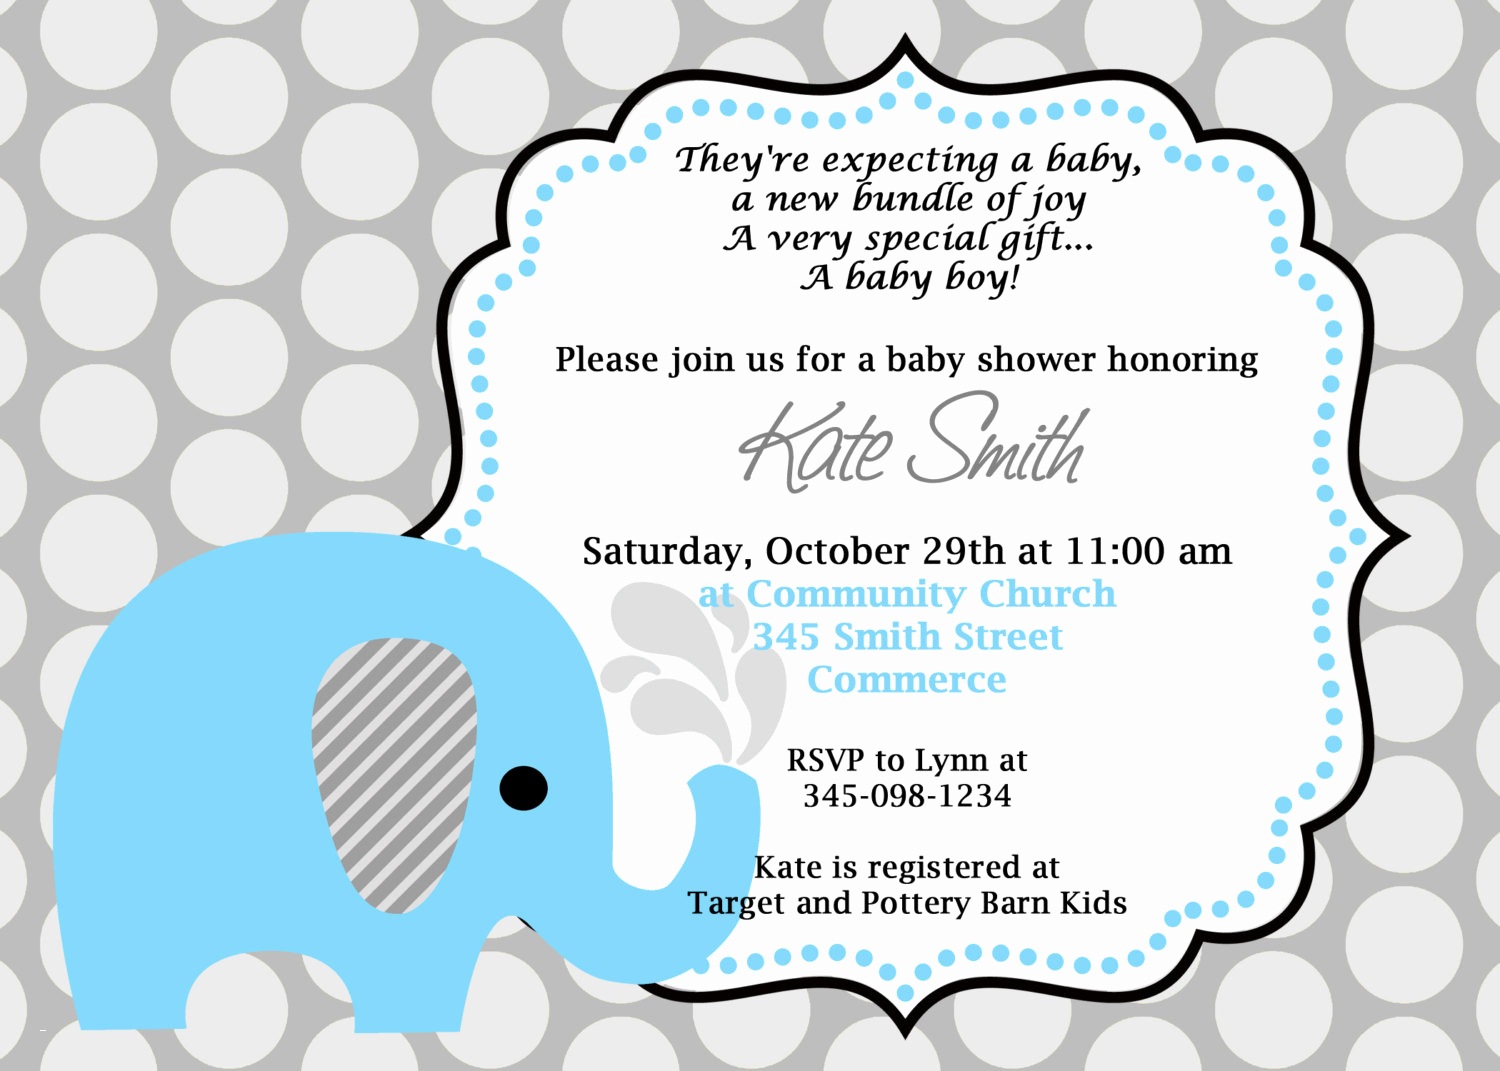 Full Size of Baby Shower:inspirational Elephant Baby Shower Invitations Photo Concepts Elephant Baby Shower Invitations As Well As Baby Shower Wishes With Baby Shower Cards For Boy Plus Baby Shower Game Ideas Together With Baby Shower Lunch Menu